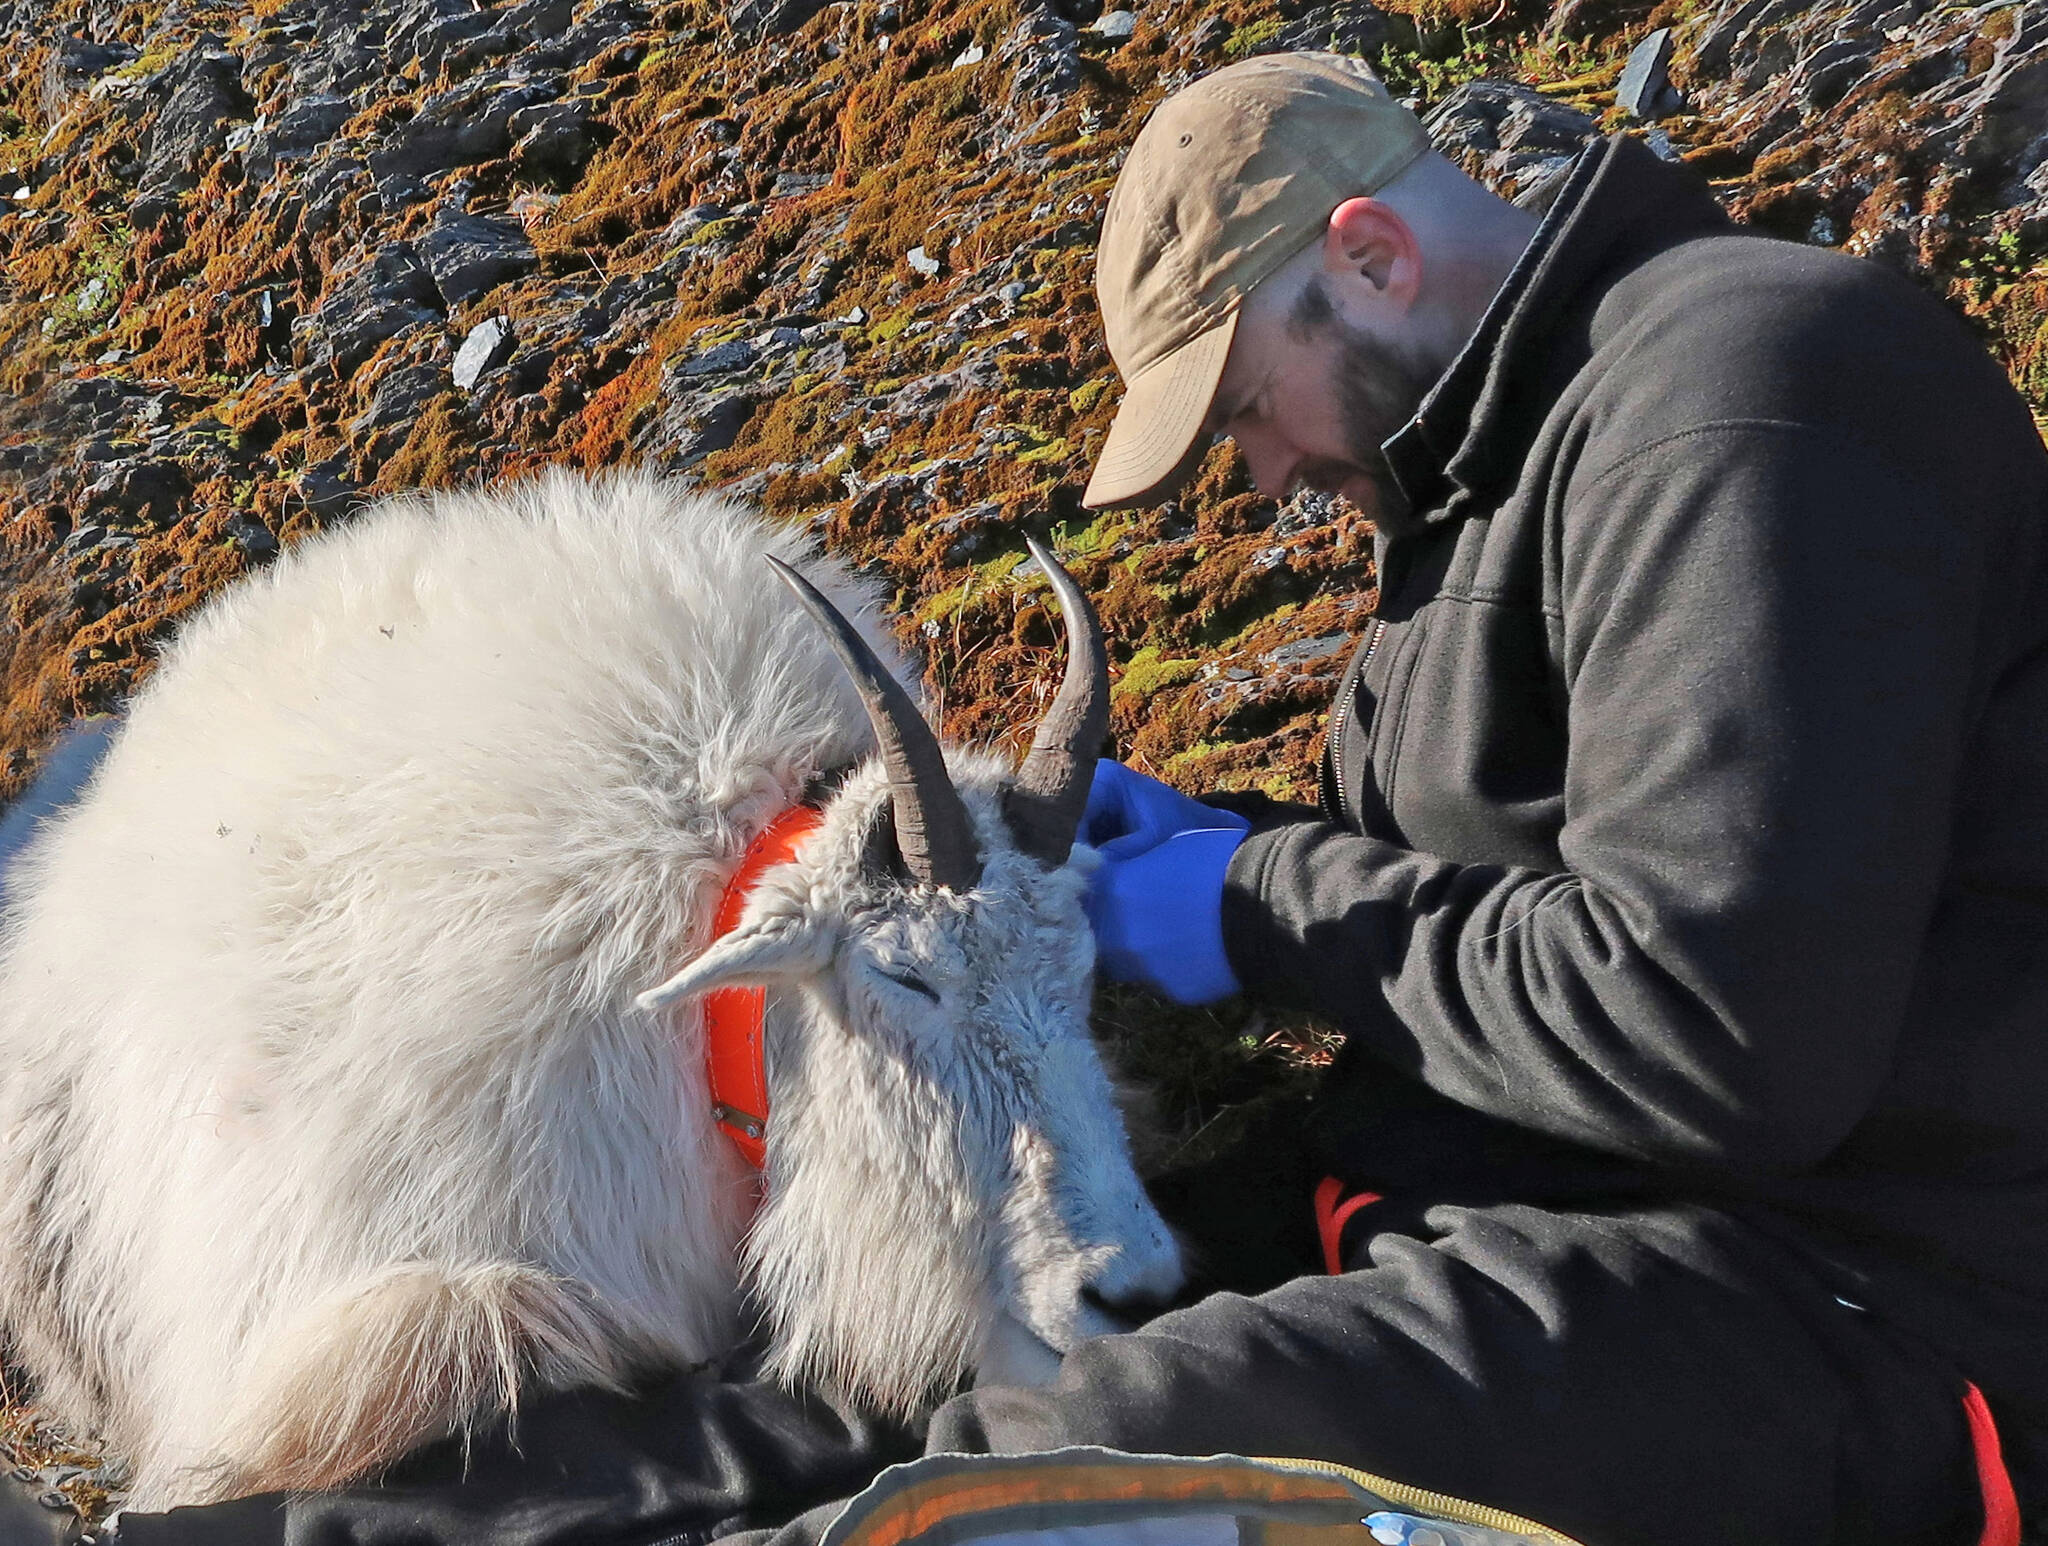 U.S. Fish & Wildlife Service pilot biologist Dom Watts fits a chemically immobilized mountain goat with a GPS radio collar near Seward. (Photo by K. White/ADF&G)